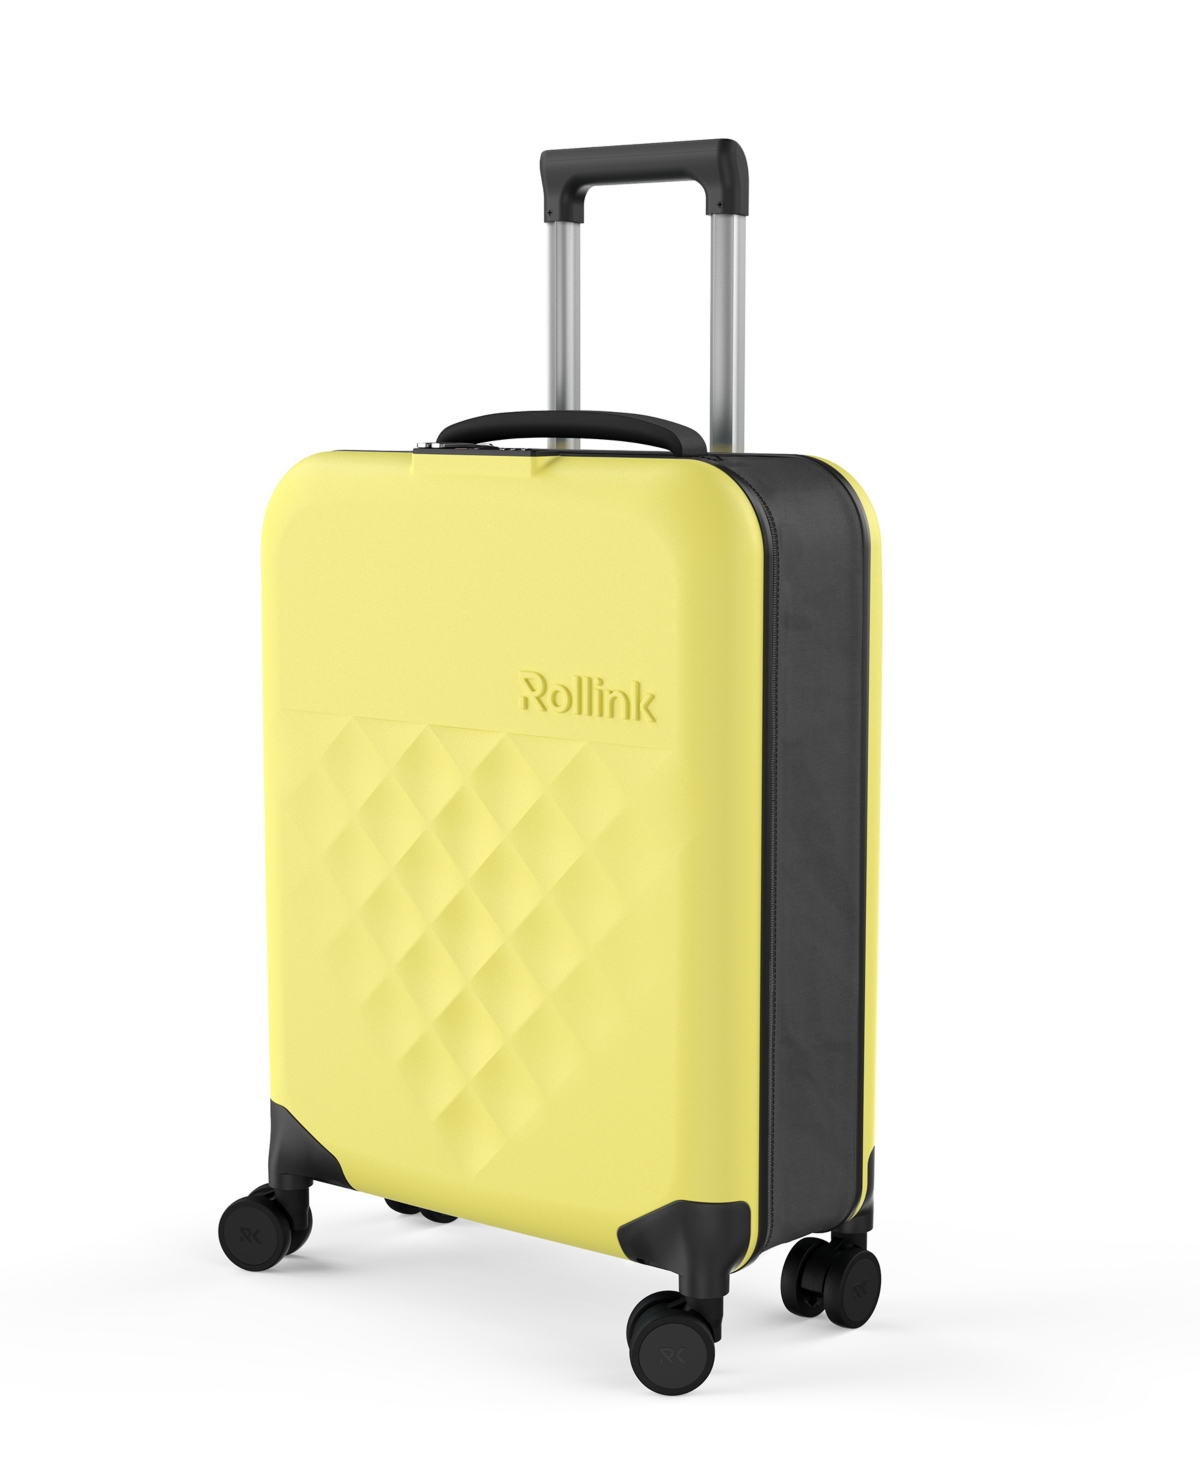 Rollink Flex 360 International 21" Carry-on Spinner Suitcase In Bright Yellow